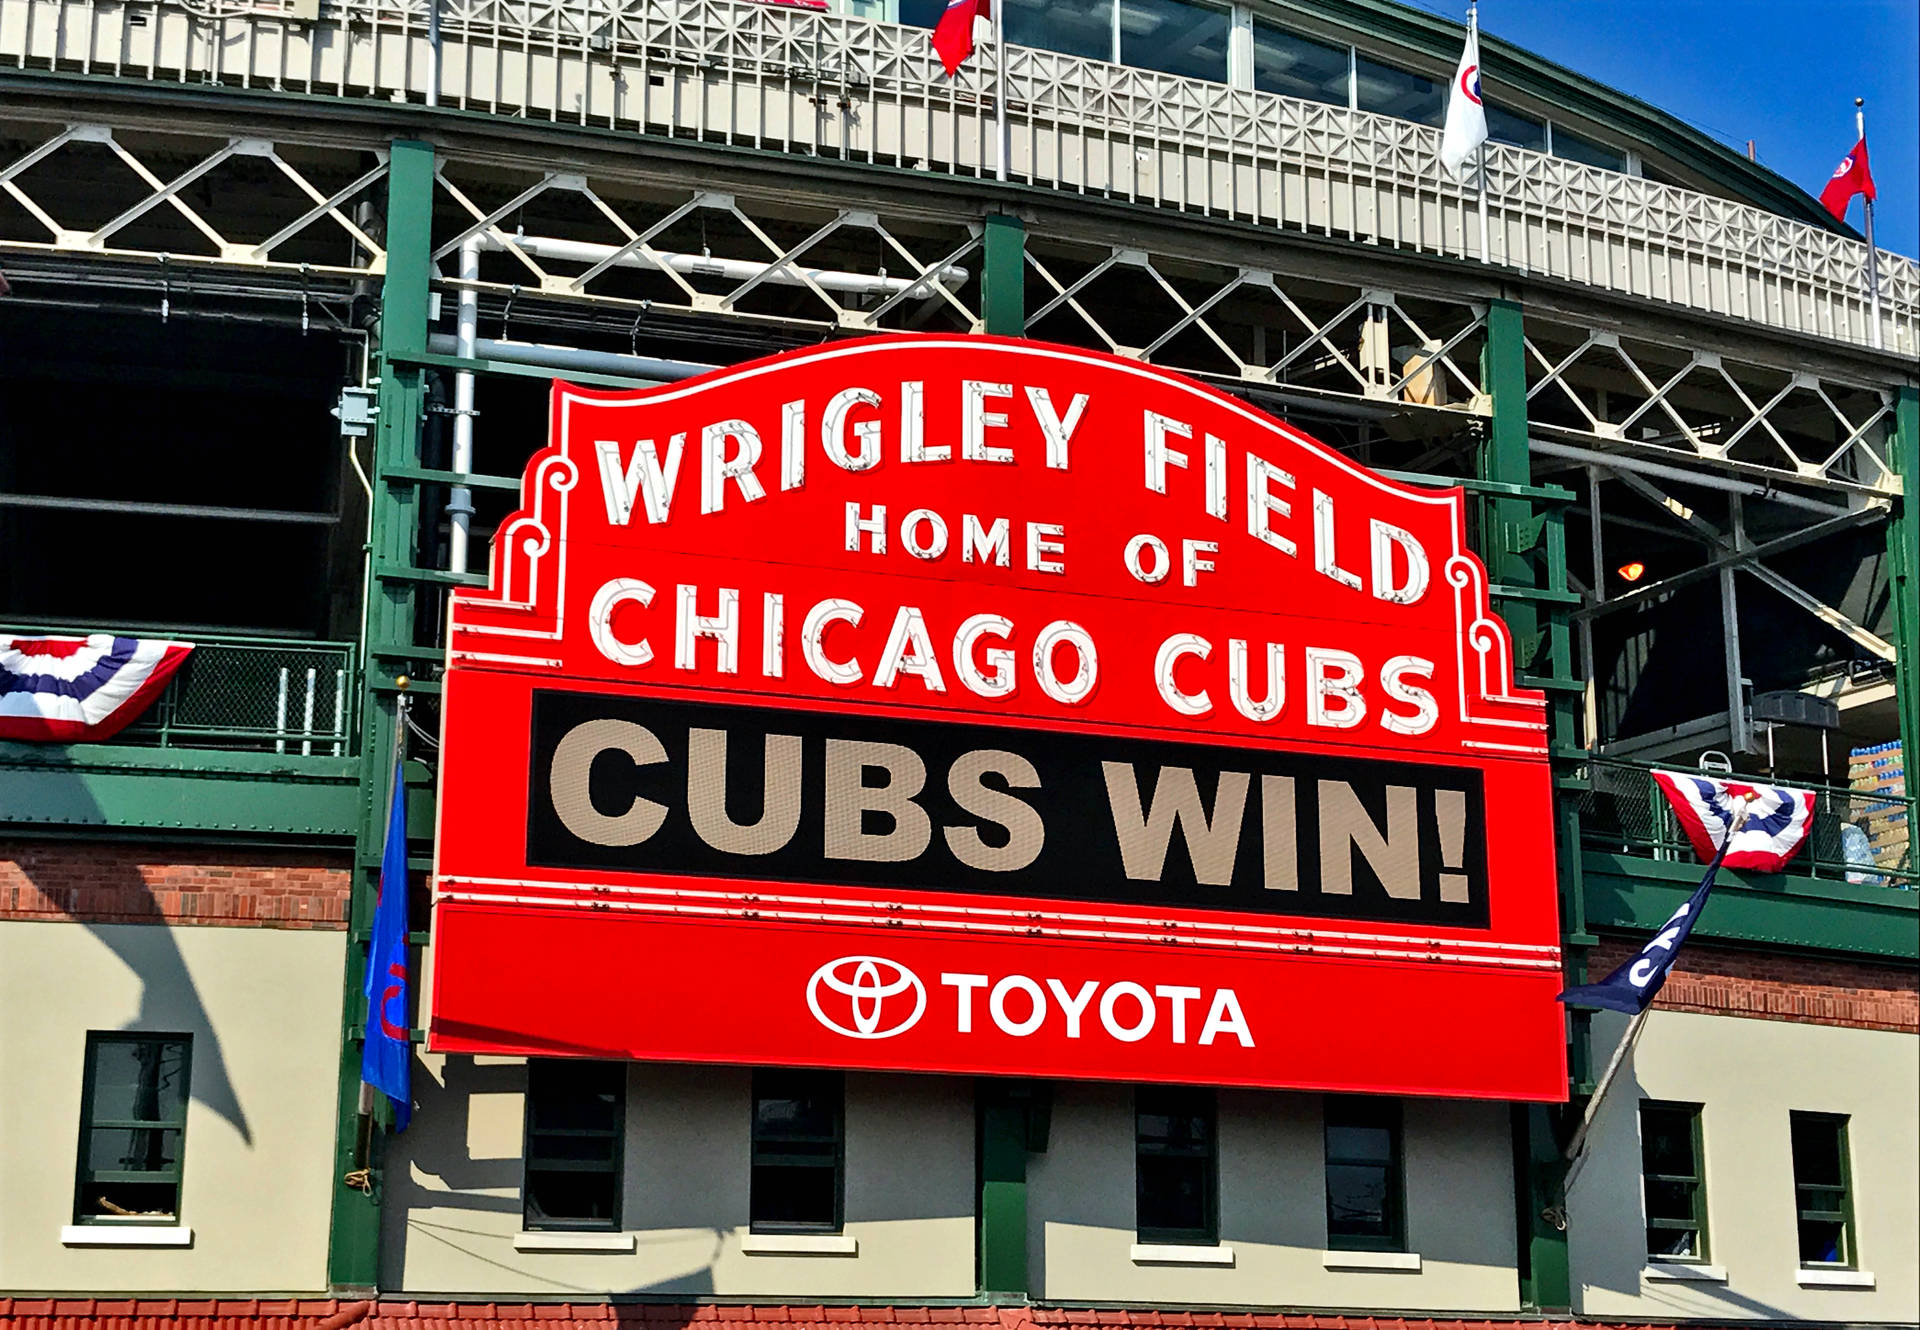 Chicago Cubs 4032X2792 Wallpaper and Background Image